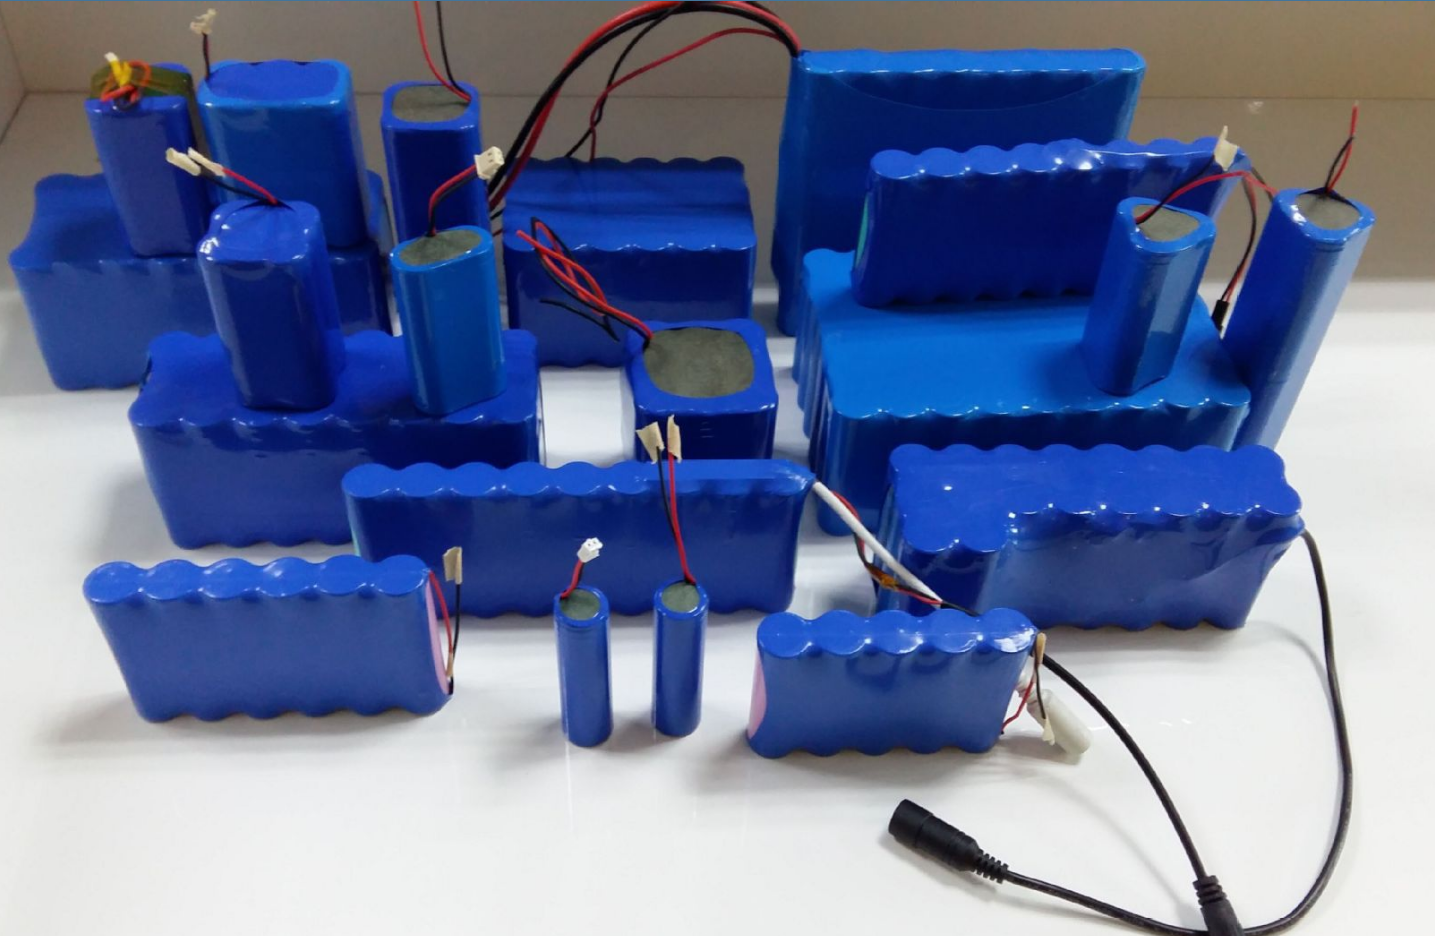 Wiring LiPo Batteries in Parallel Possibility